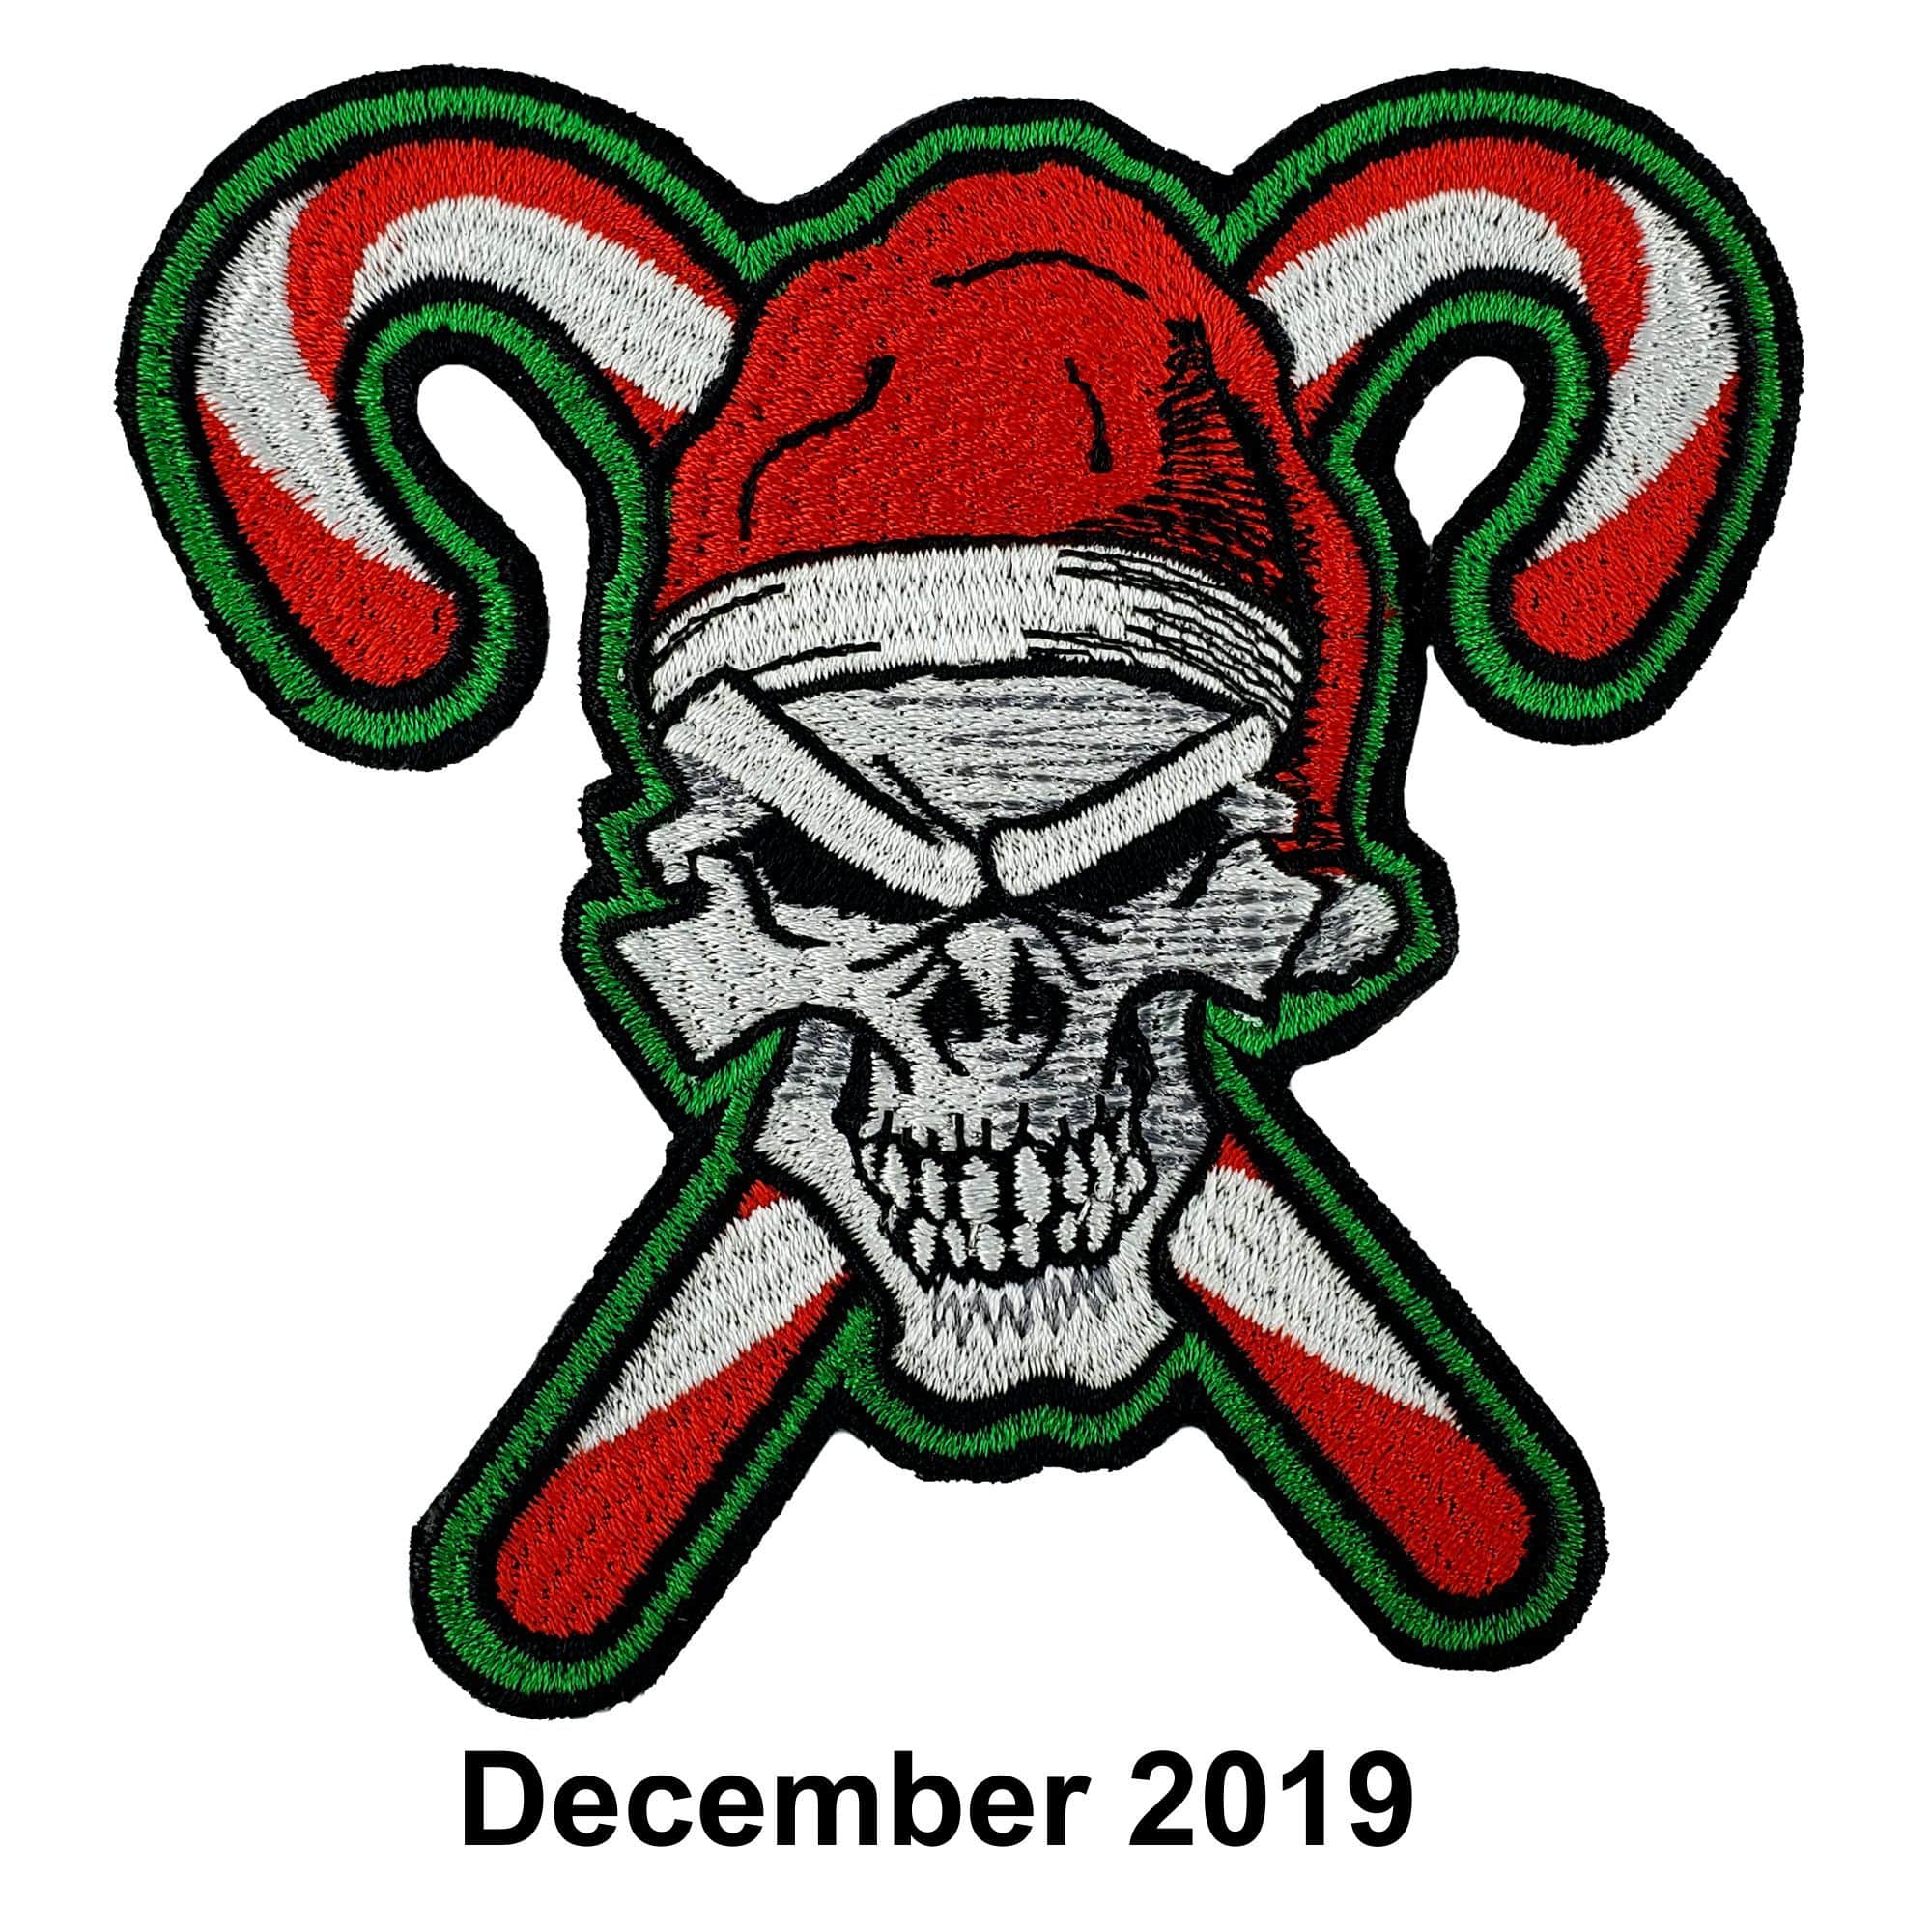 December 2019 Patch of the Month - Skull and Cross Candycanes